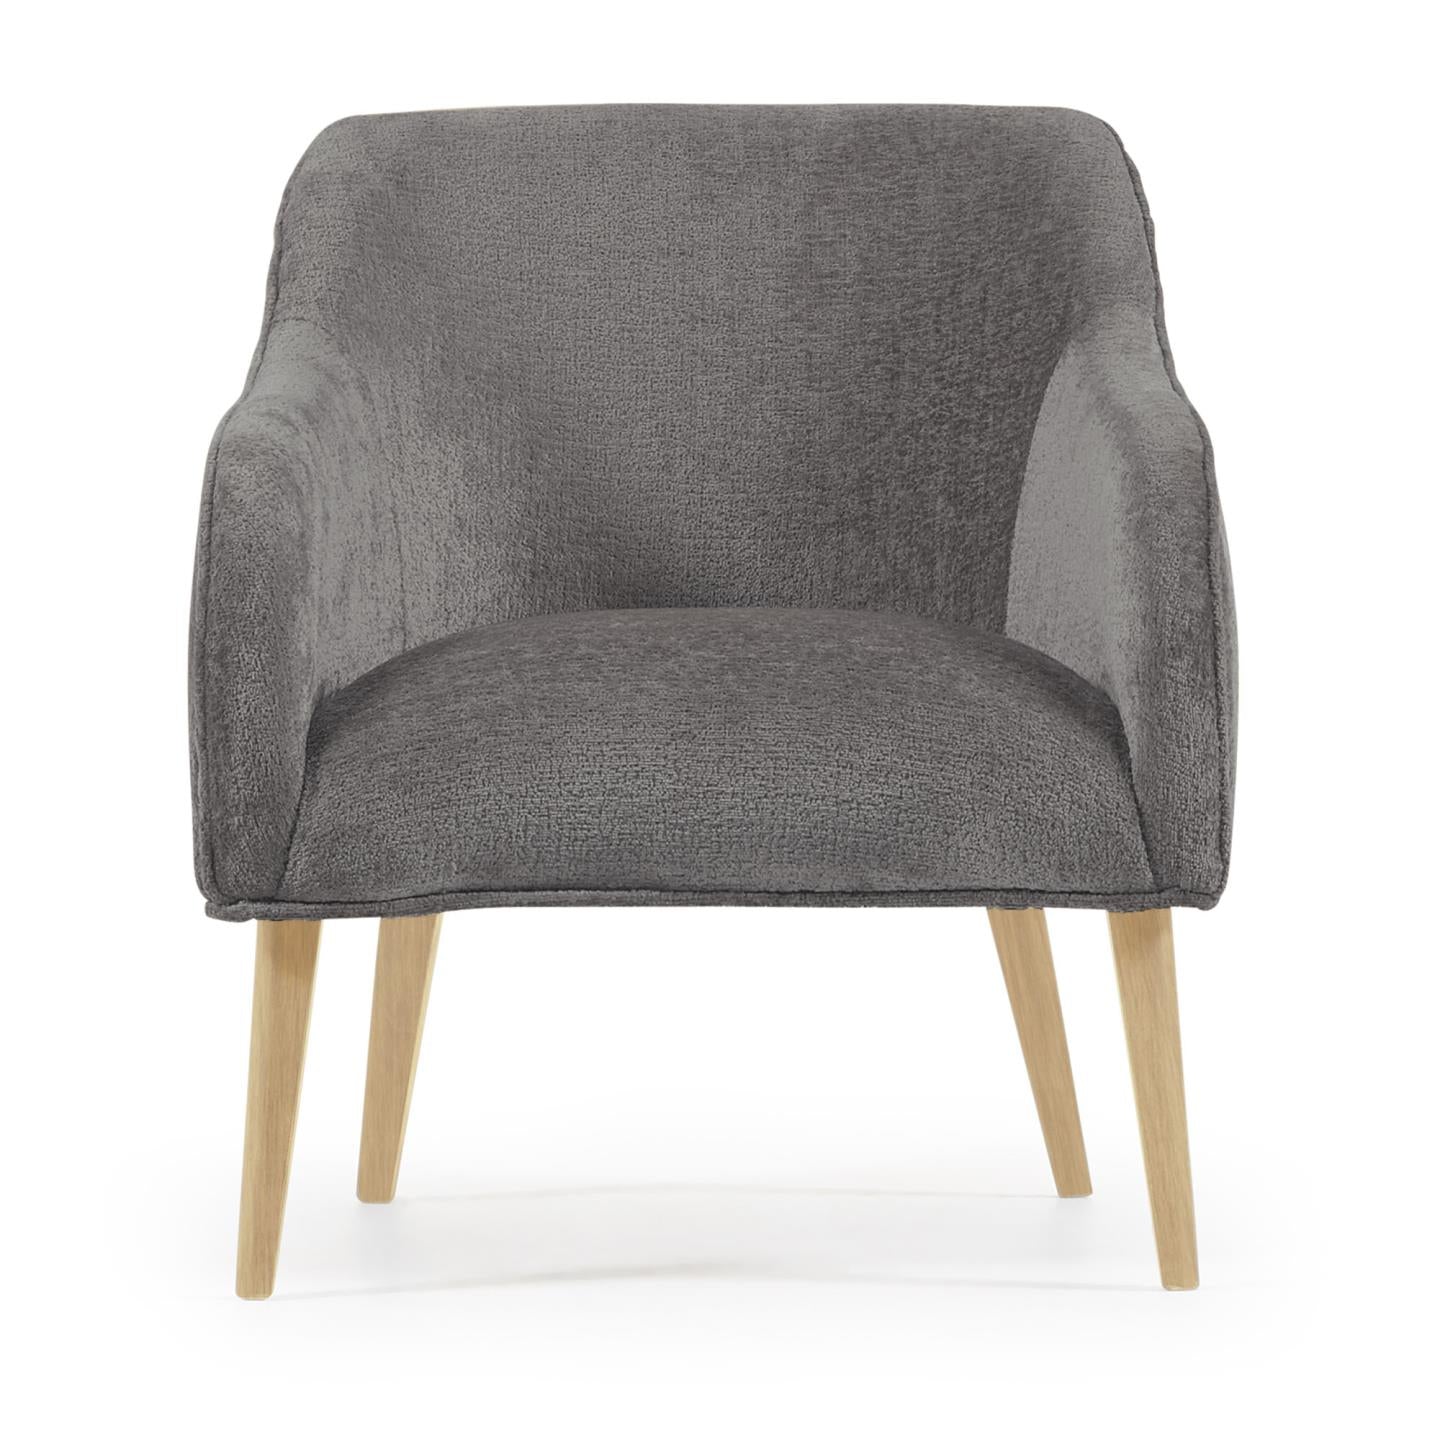 Bobly armchair in dark grey chenille and wooden legs with natural finish